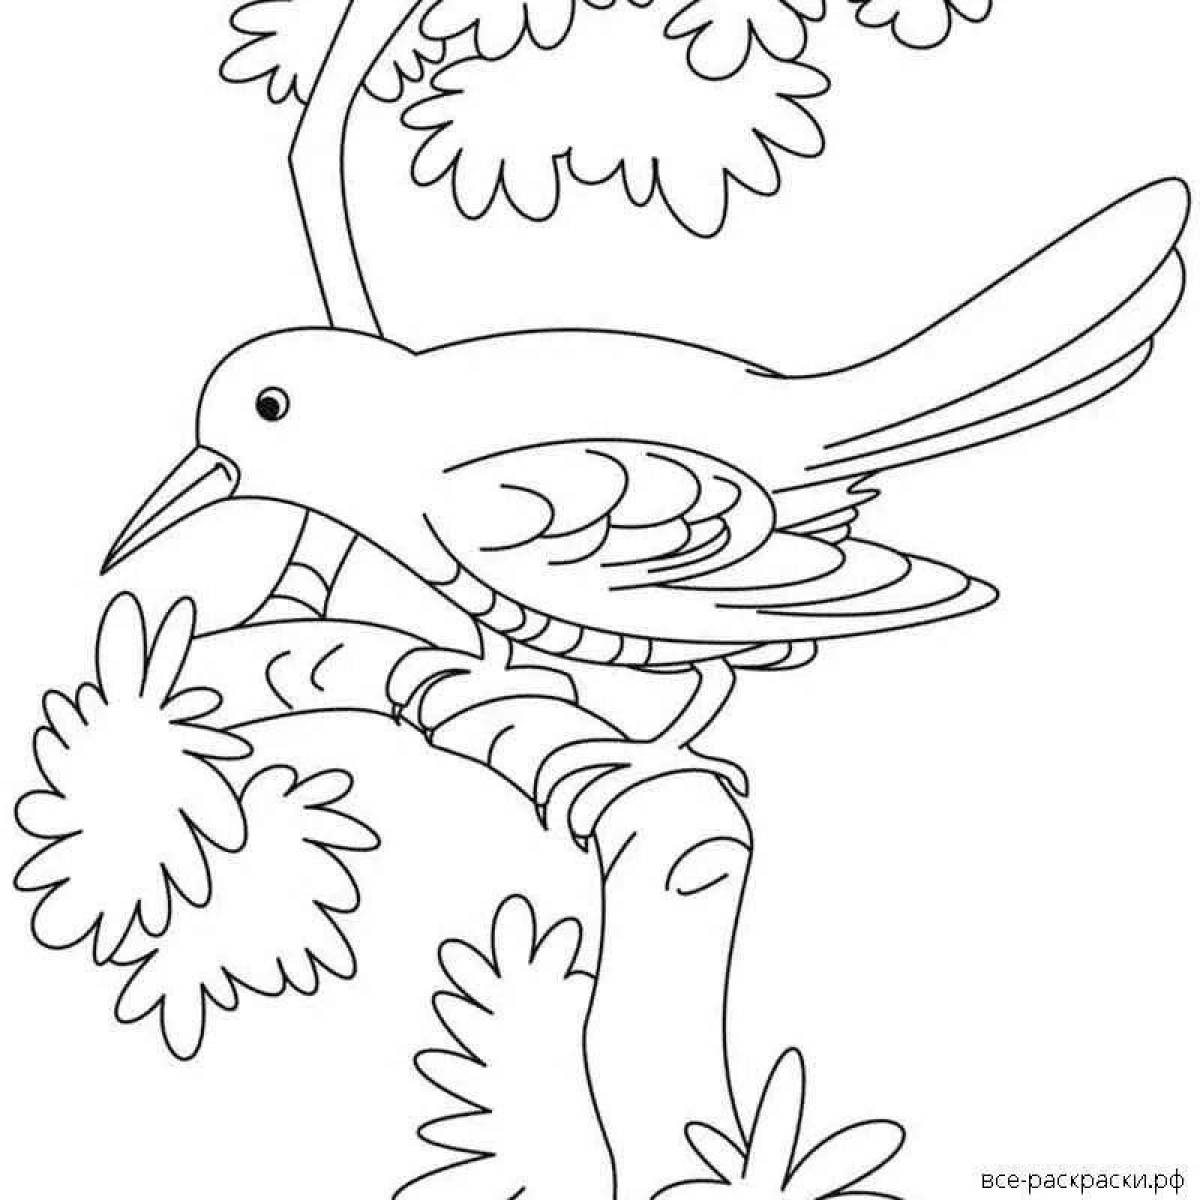 Glowing sparrow and crow coloring page